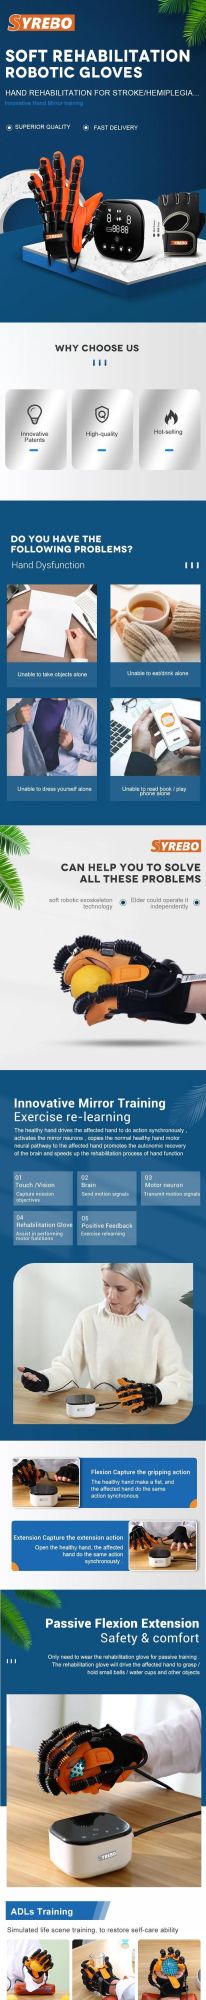 High Quality New Product Hand Training Robot Glove Physical Therapy Rehabilitation Medical Equipment for Stroke Hand Function Recovery